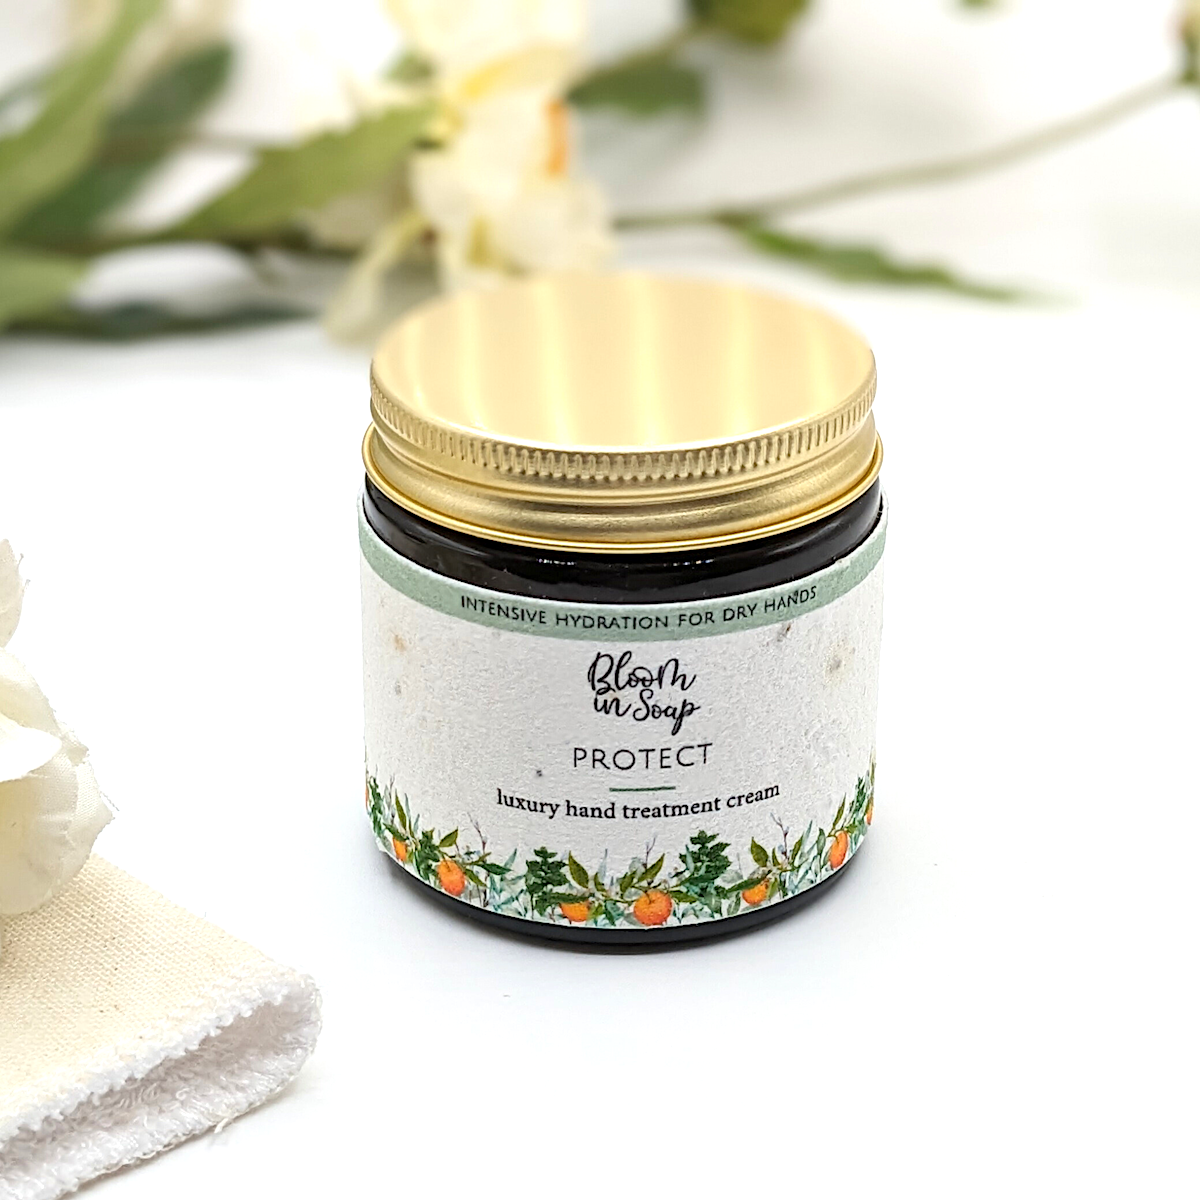 Protect luxury hand treatment cream from Bloom In Soap